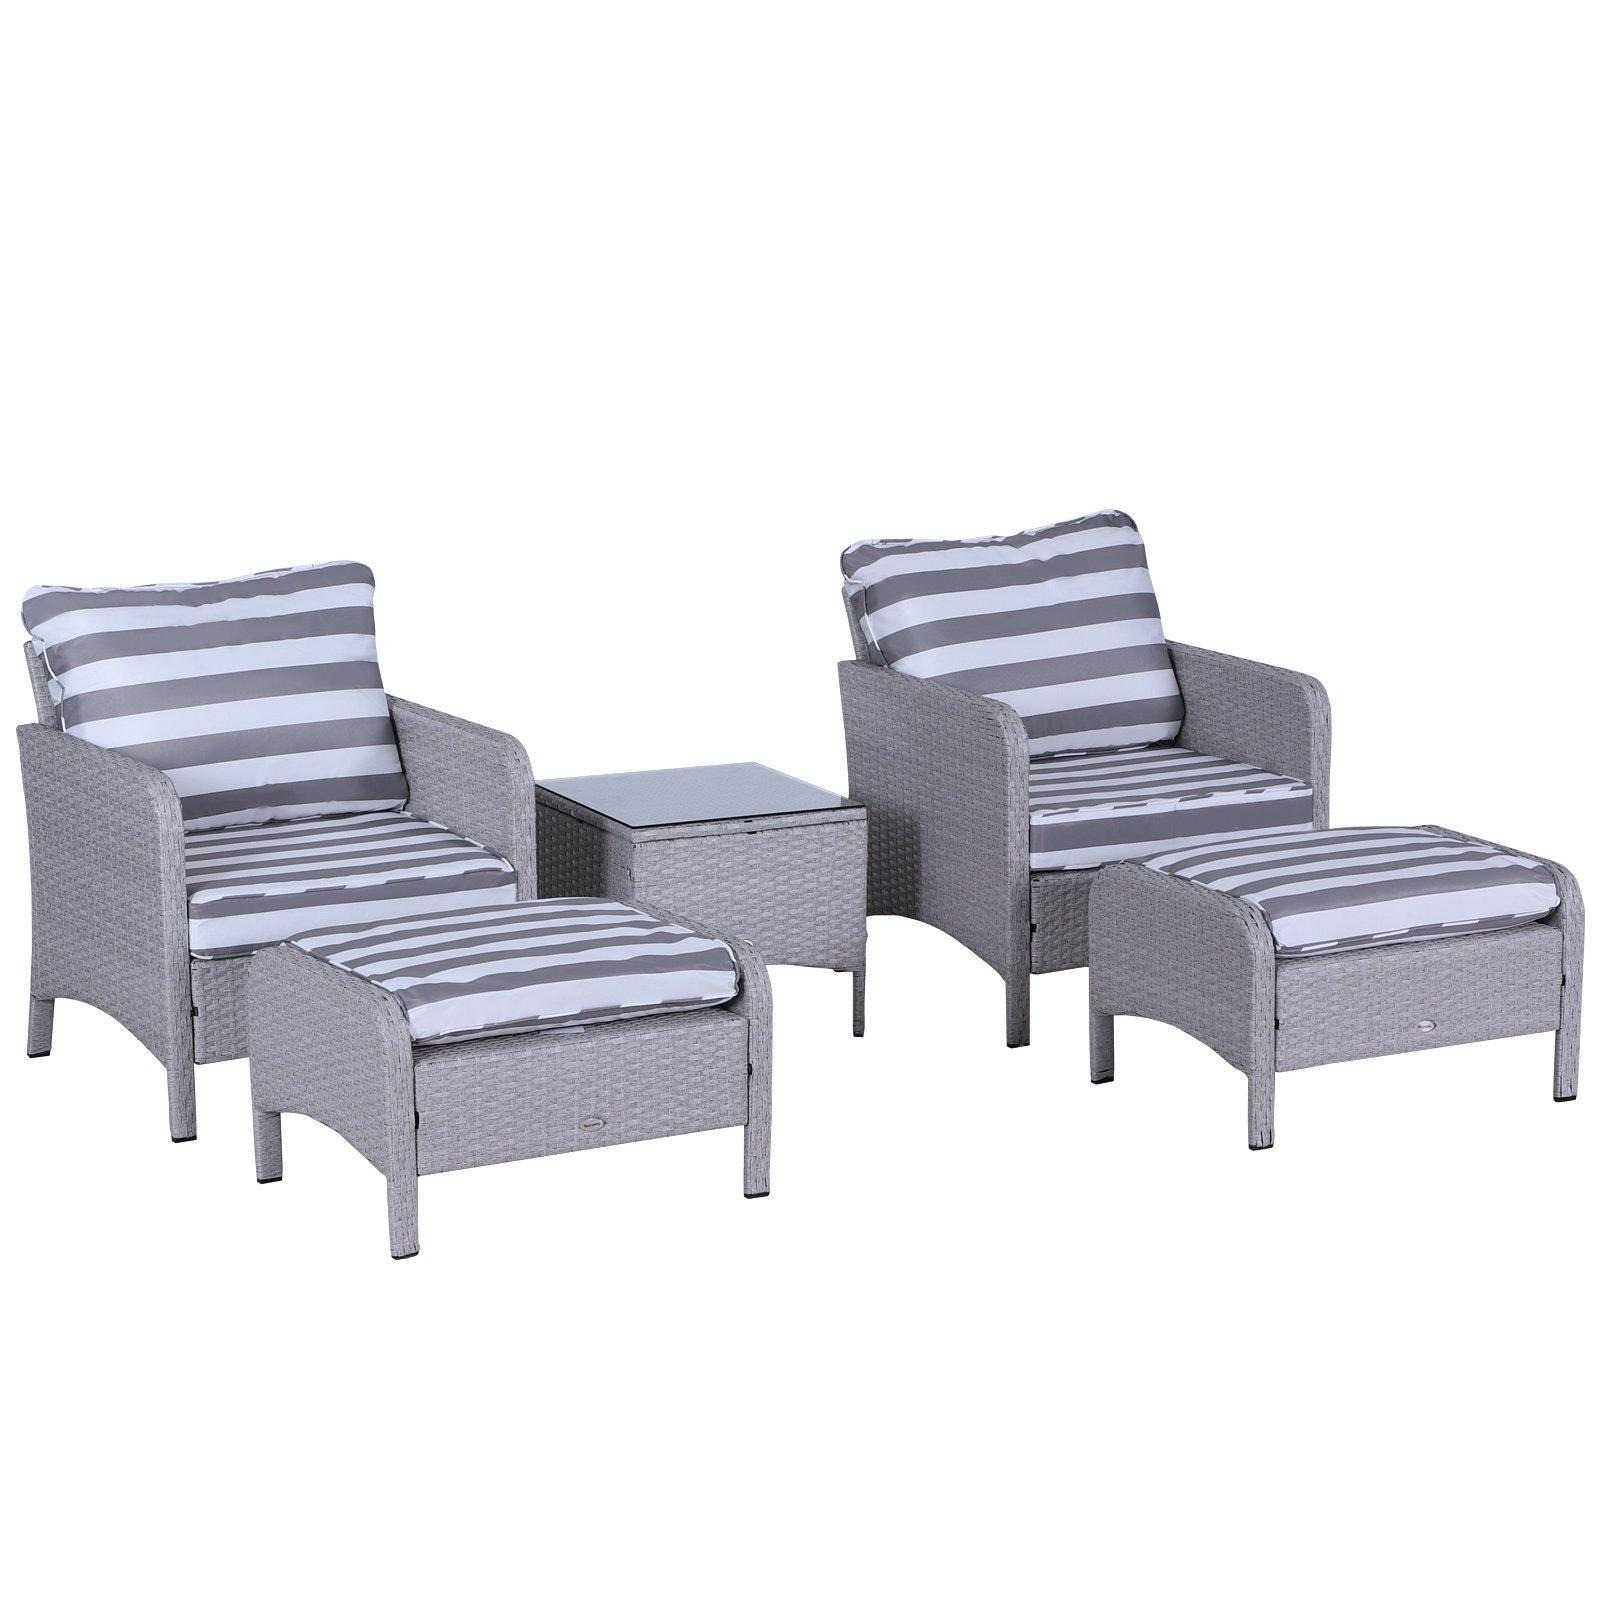 5 Pcs PE Rattan Garden Patio Furniture Set with Chair Stool Coffee Table - image 1